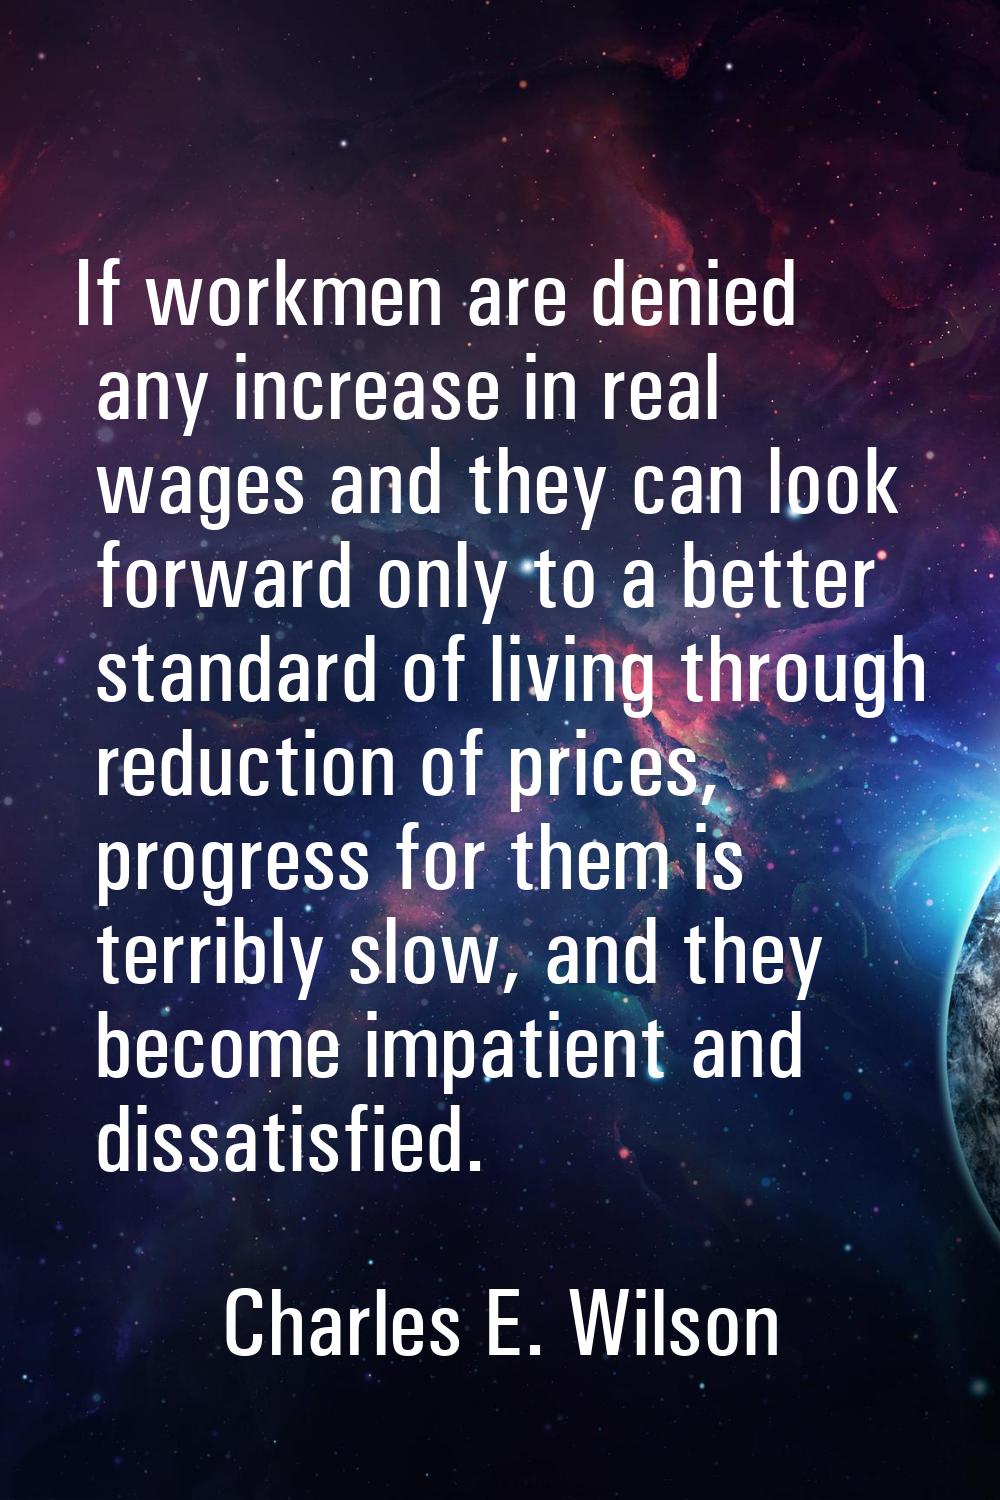 If workmen are denied any increase in real wages and they can look forward only to a better standar